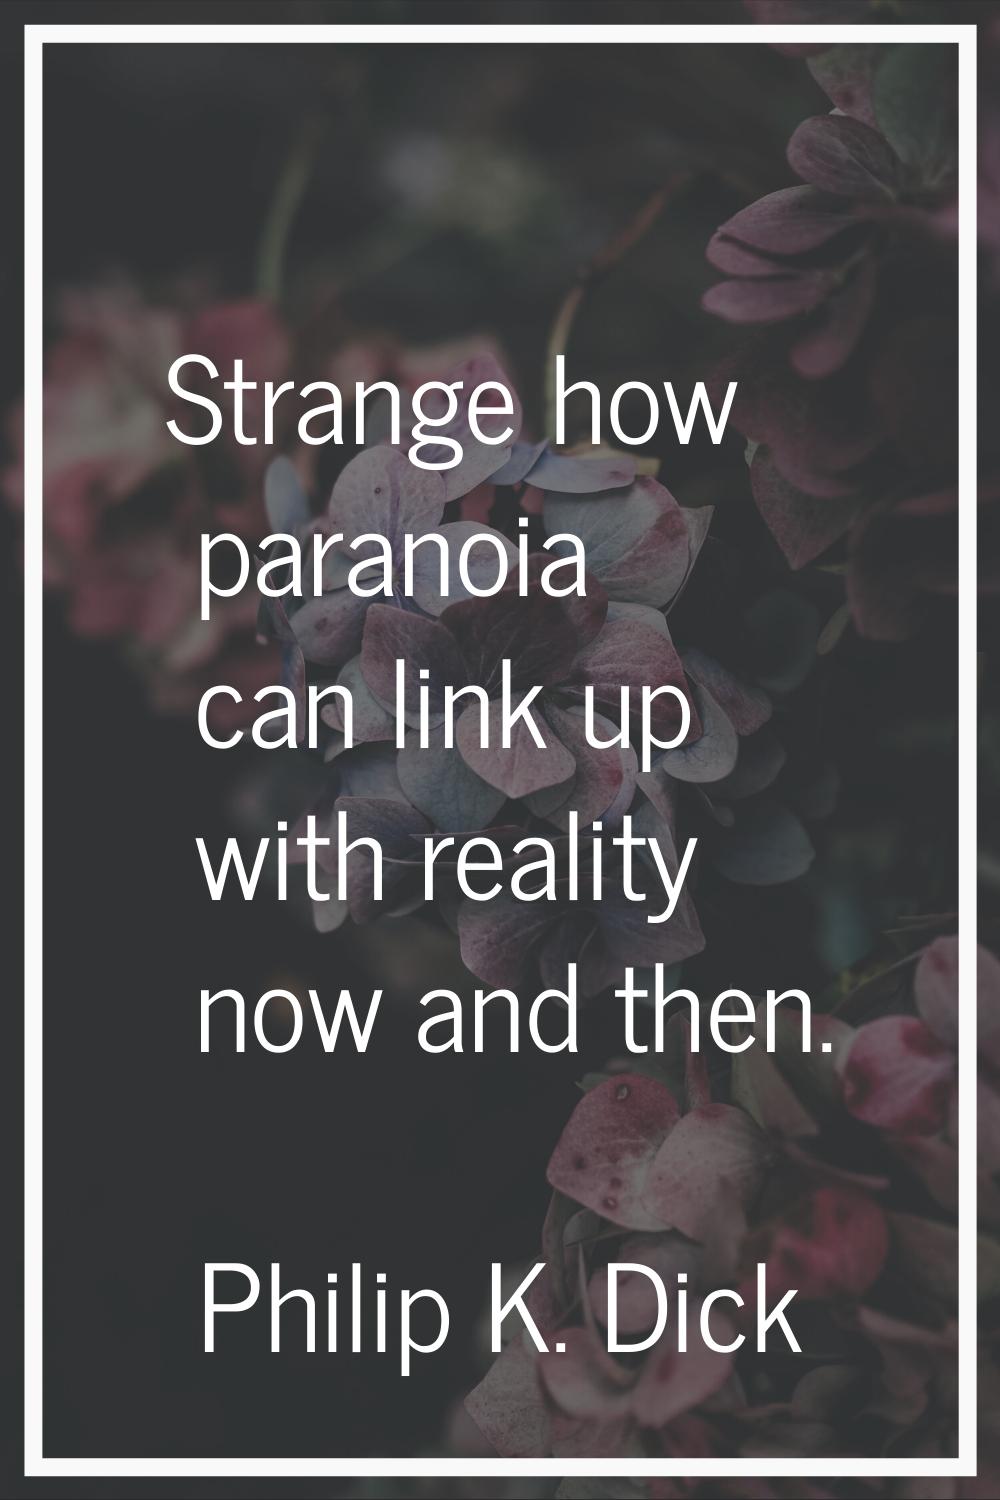 Strange how paranoia can link up with reality now and then.